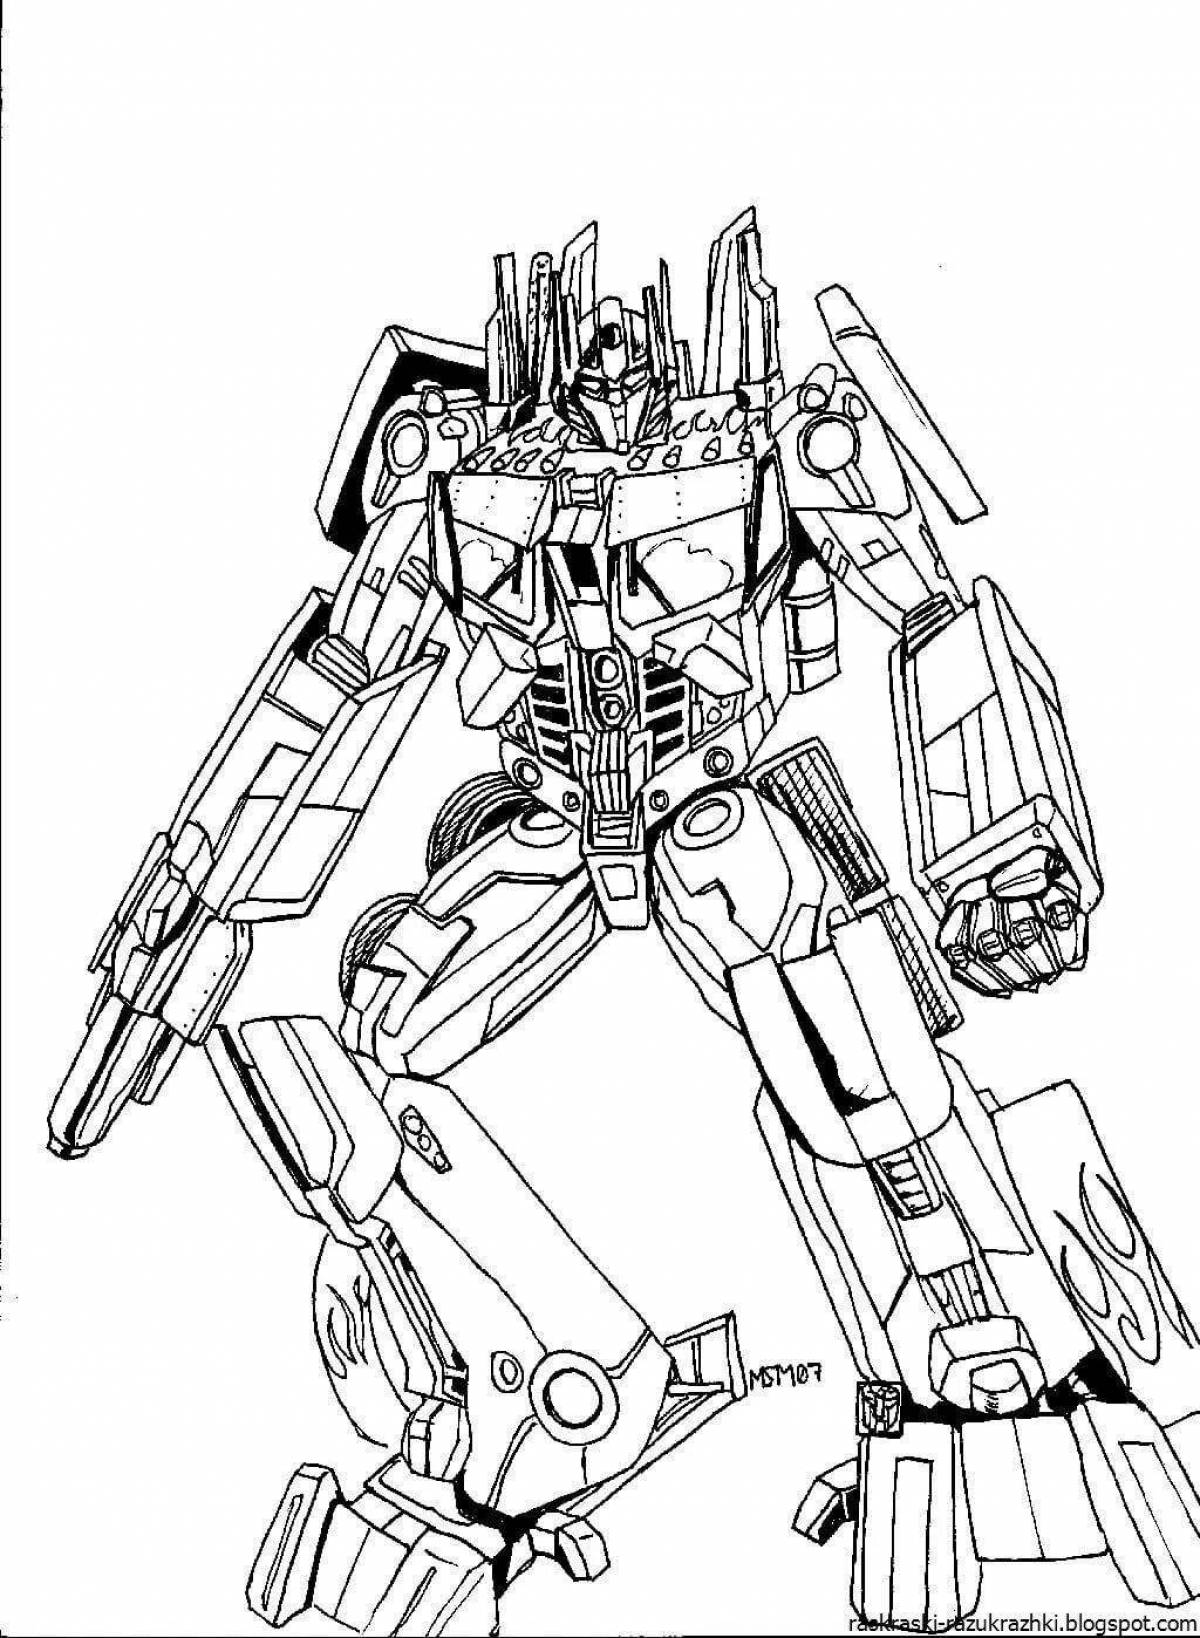 Bumblebee robot coloring page